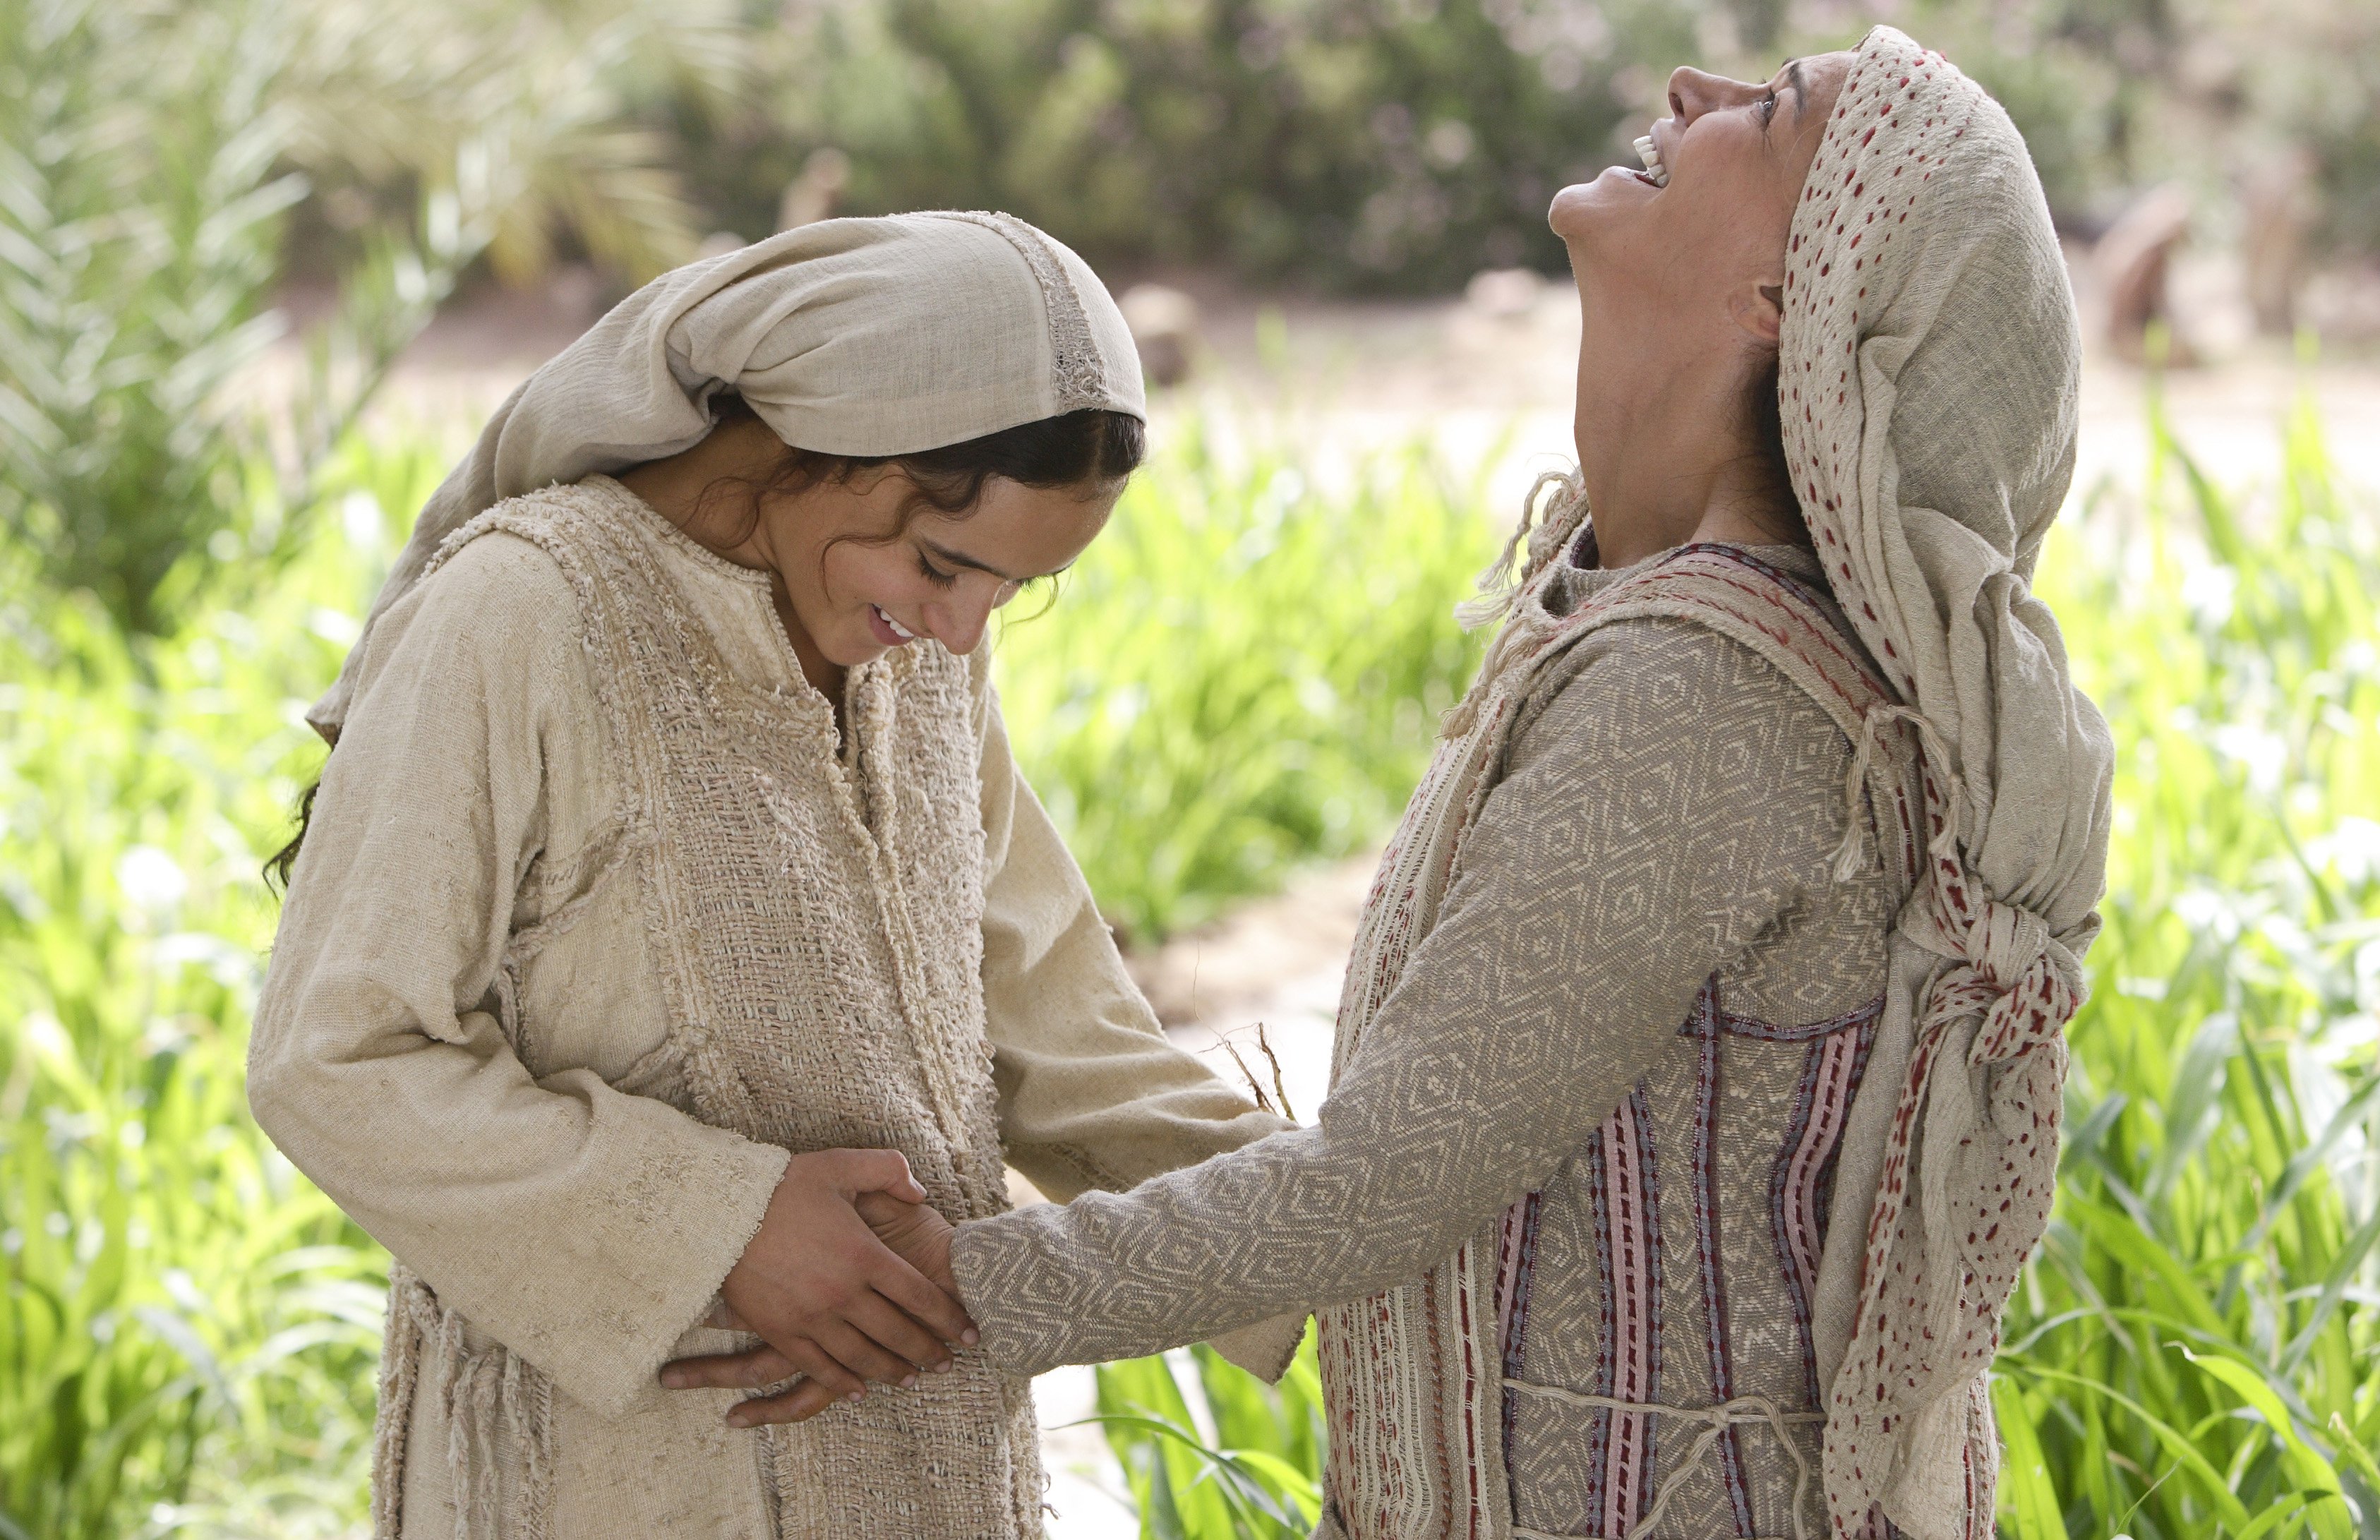 The Visitation of the Blessed Virgin Mary: Two Mothers Rejoice!